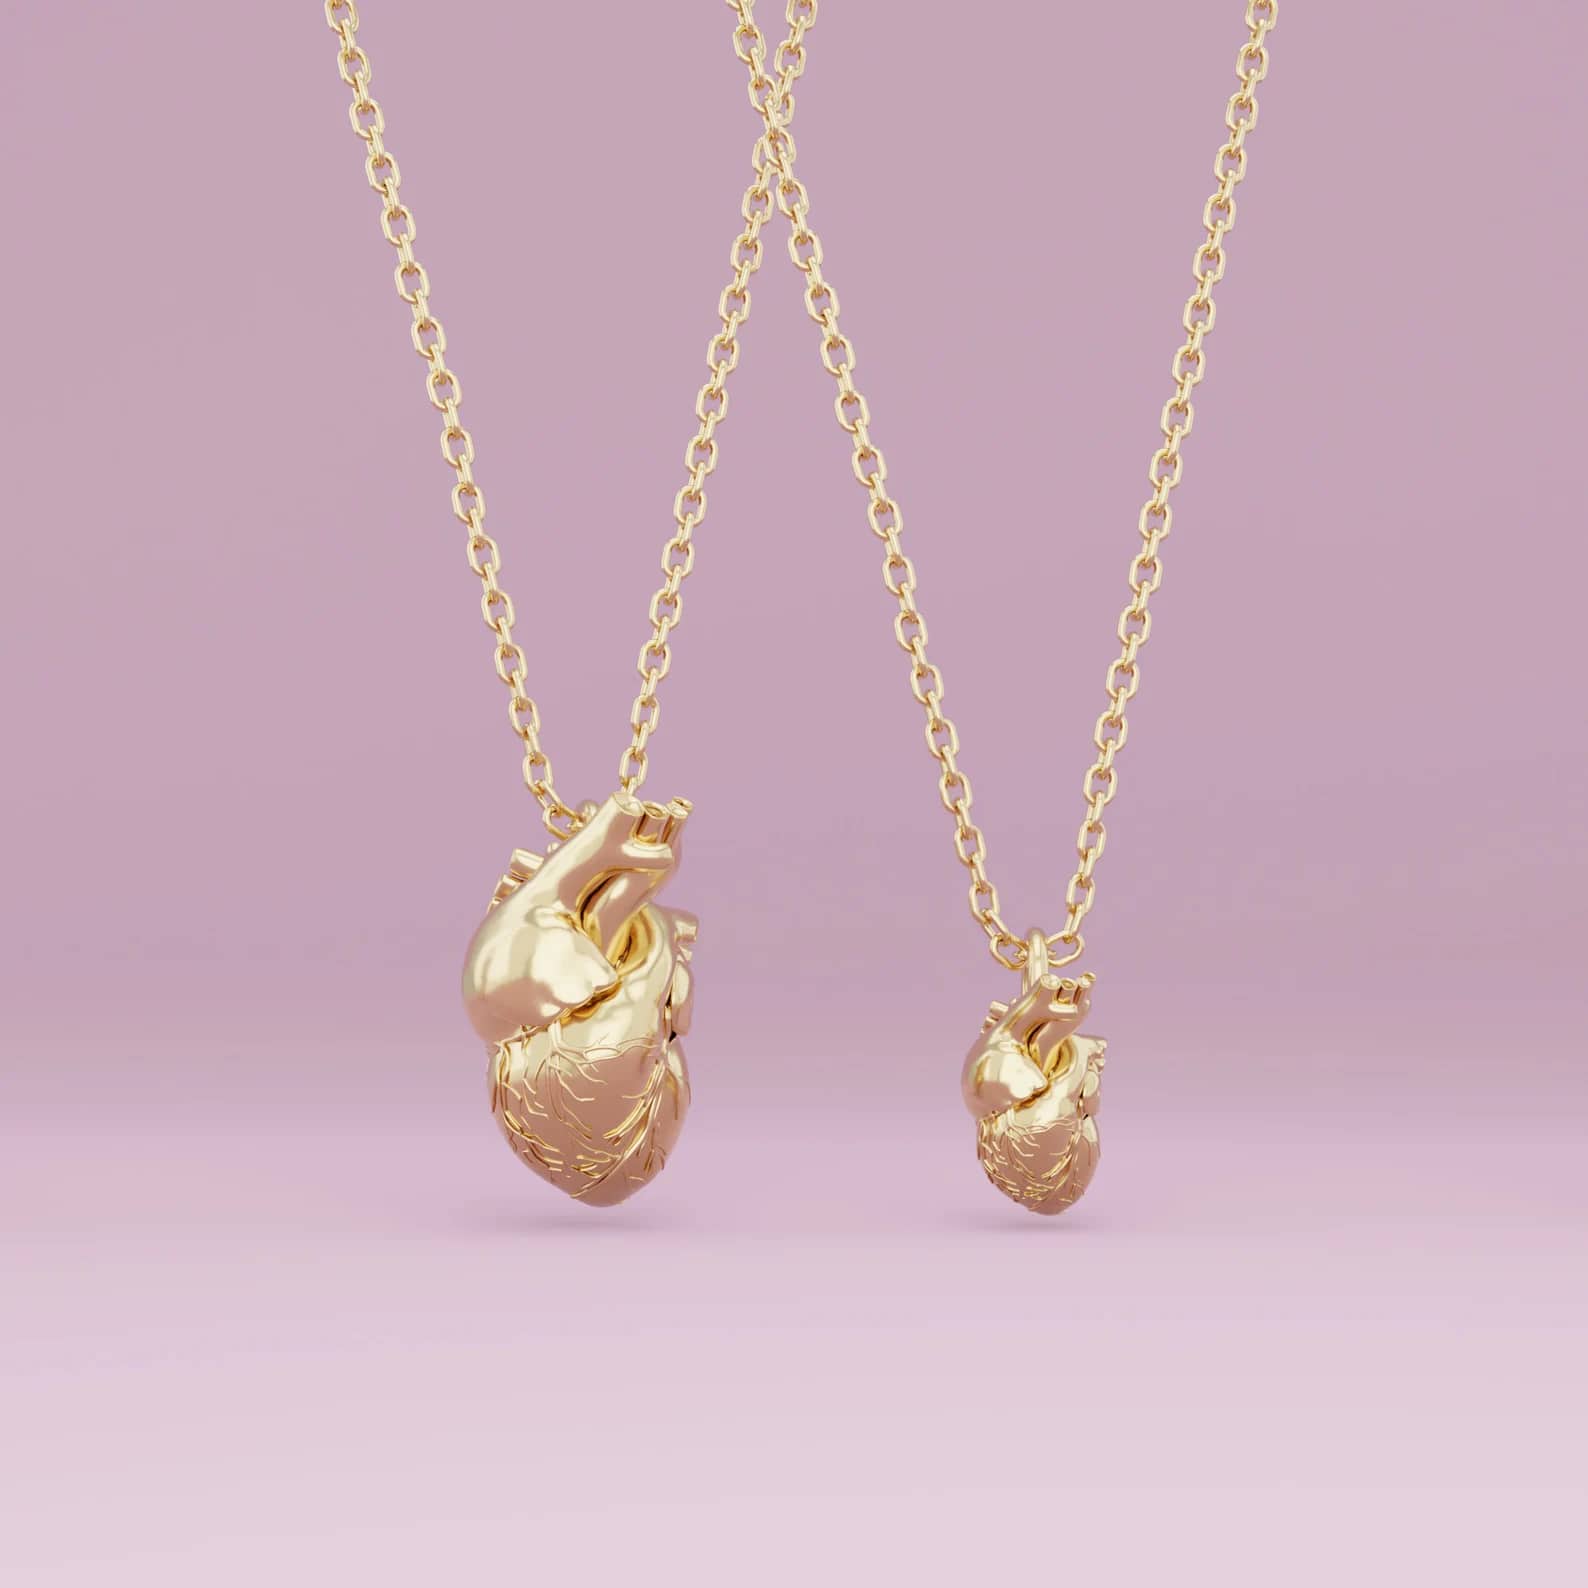 A small and big anatomical heart / love necklace